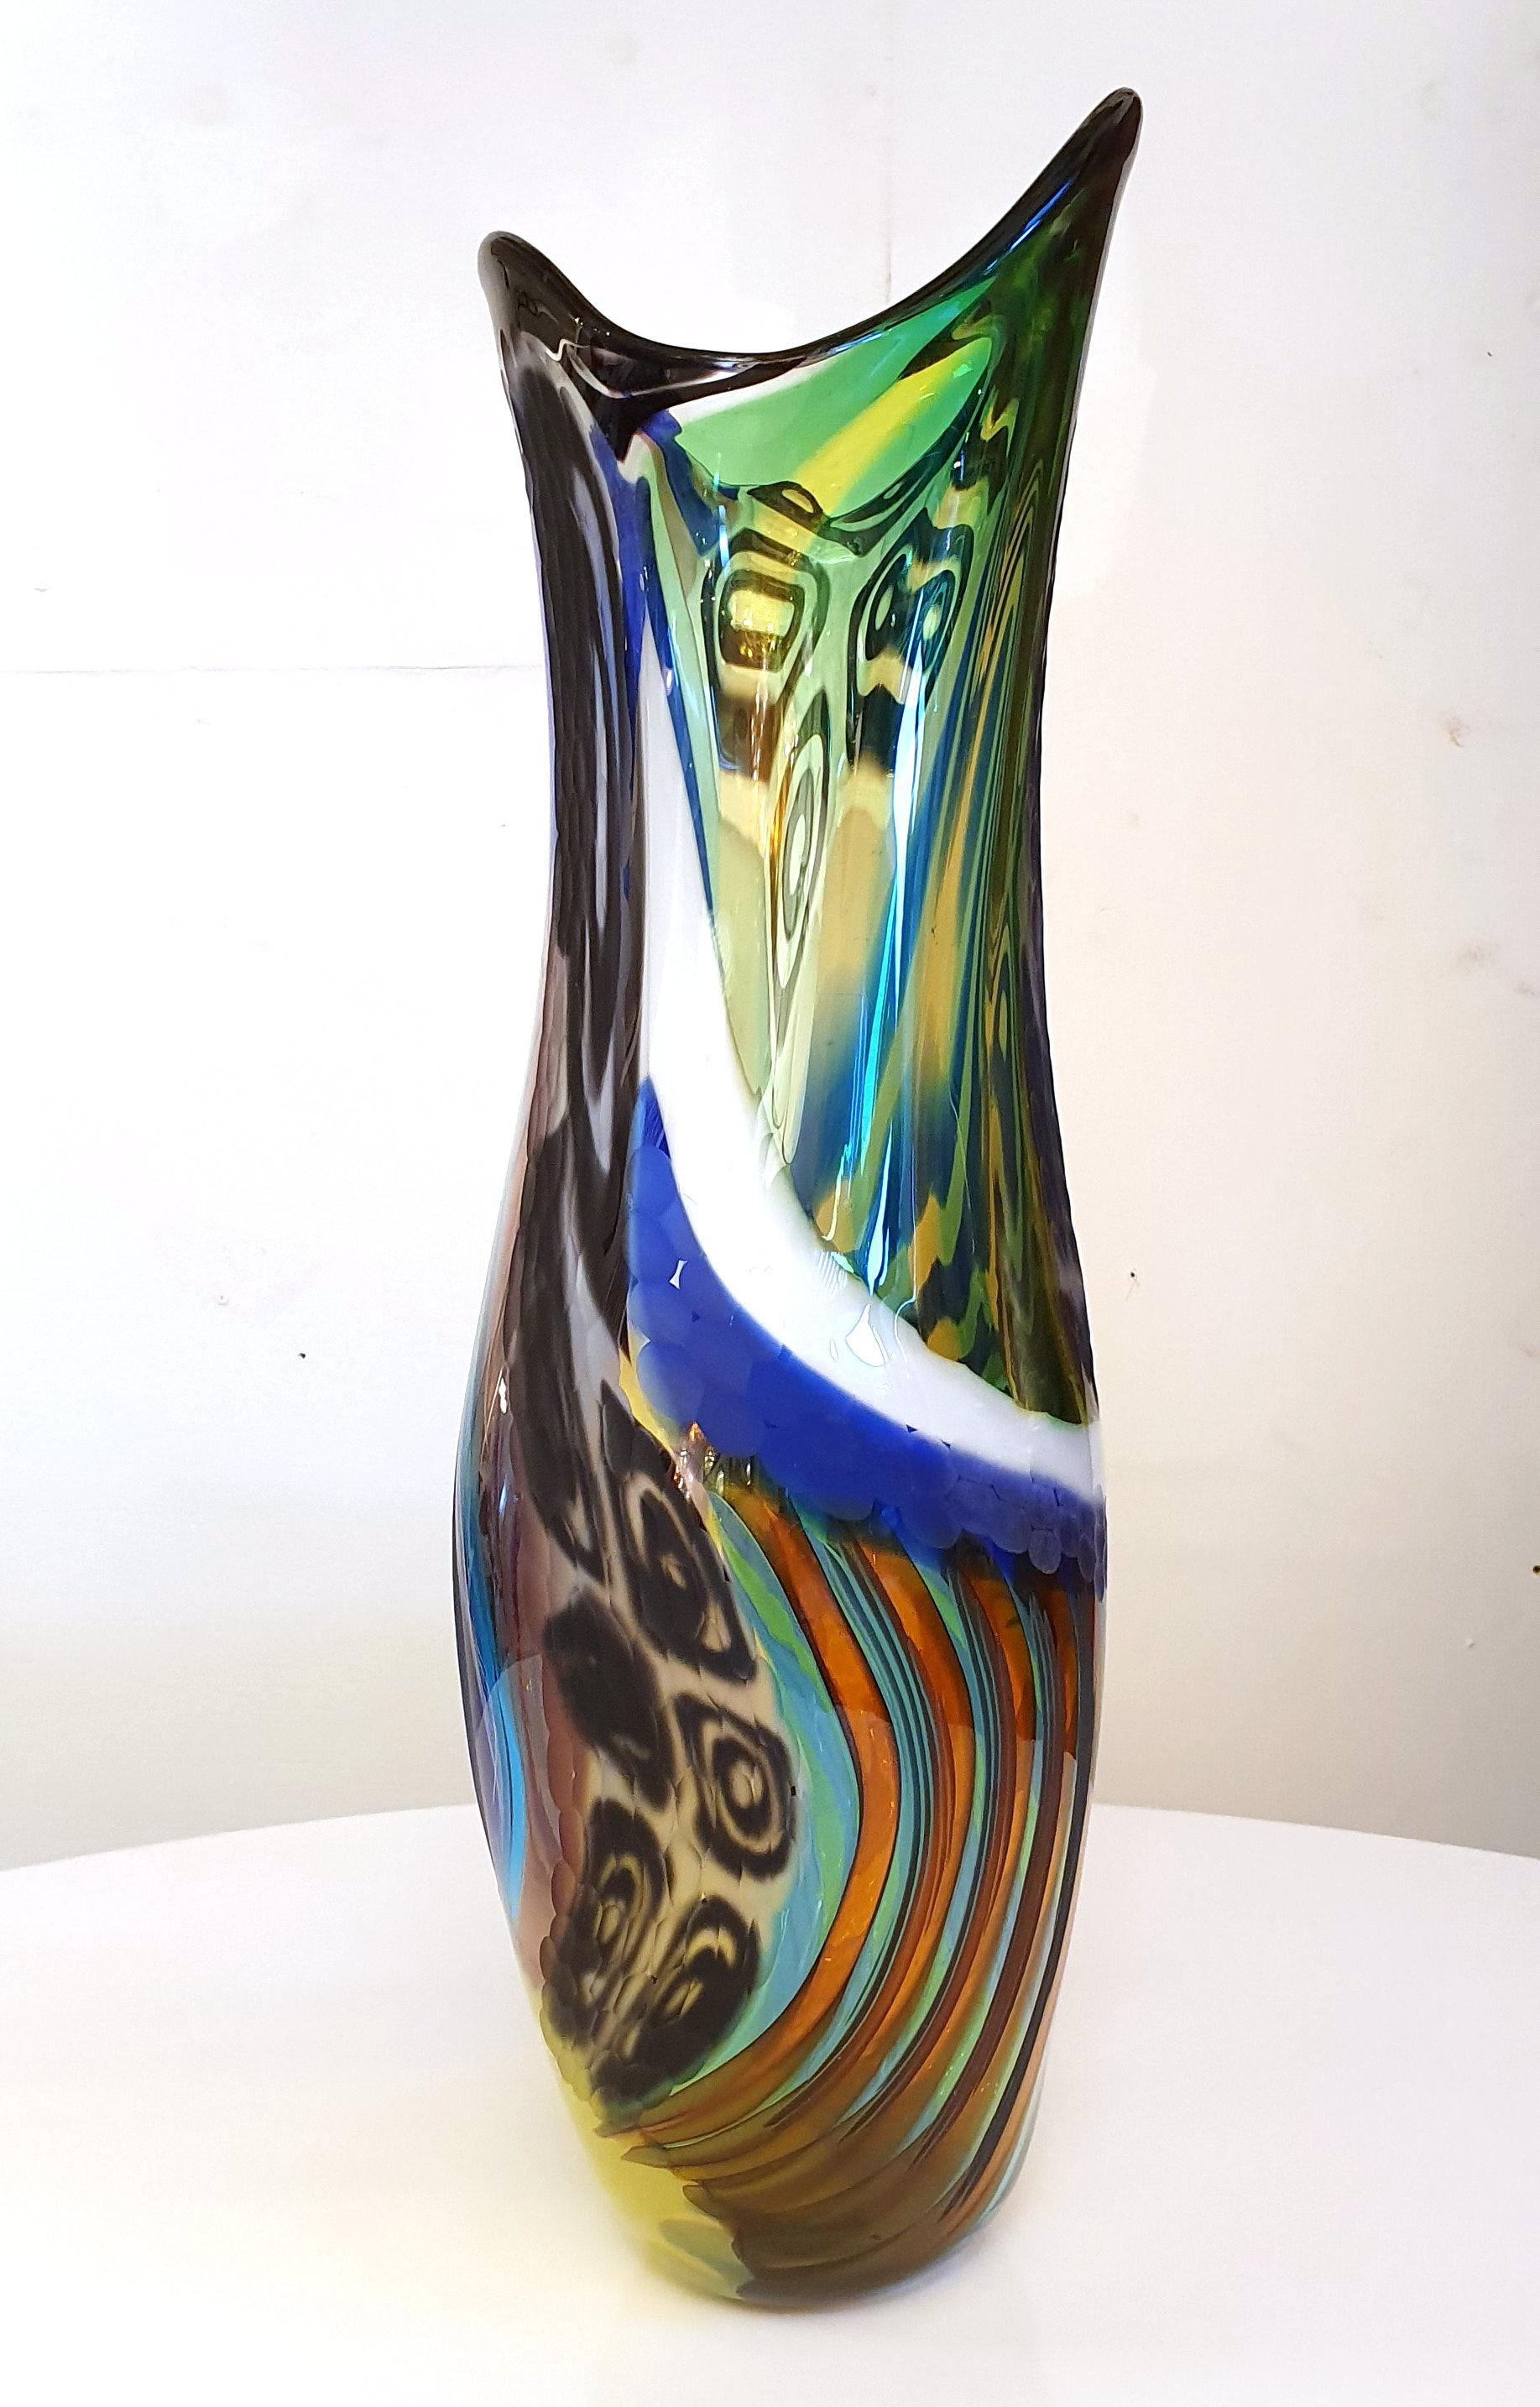 Murano glass vase by Lino Tagliapietra signed by the artist.